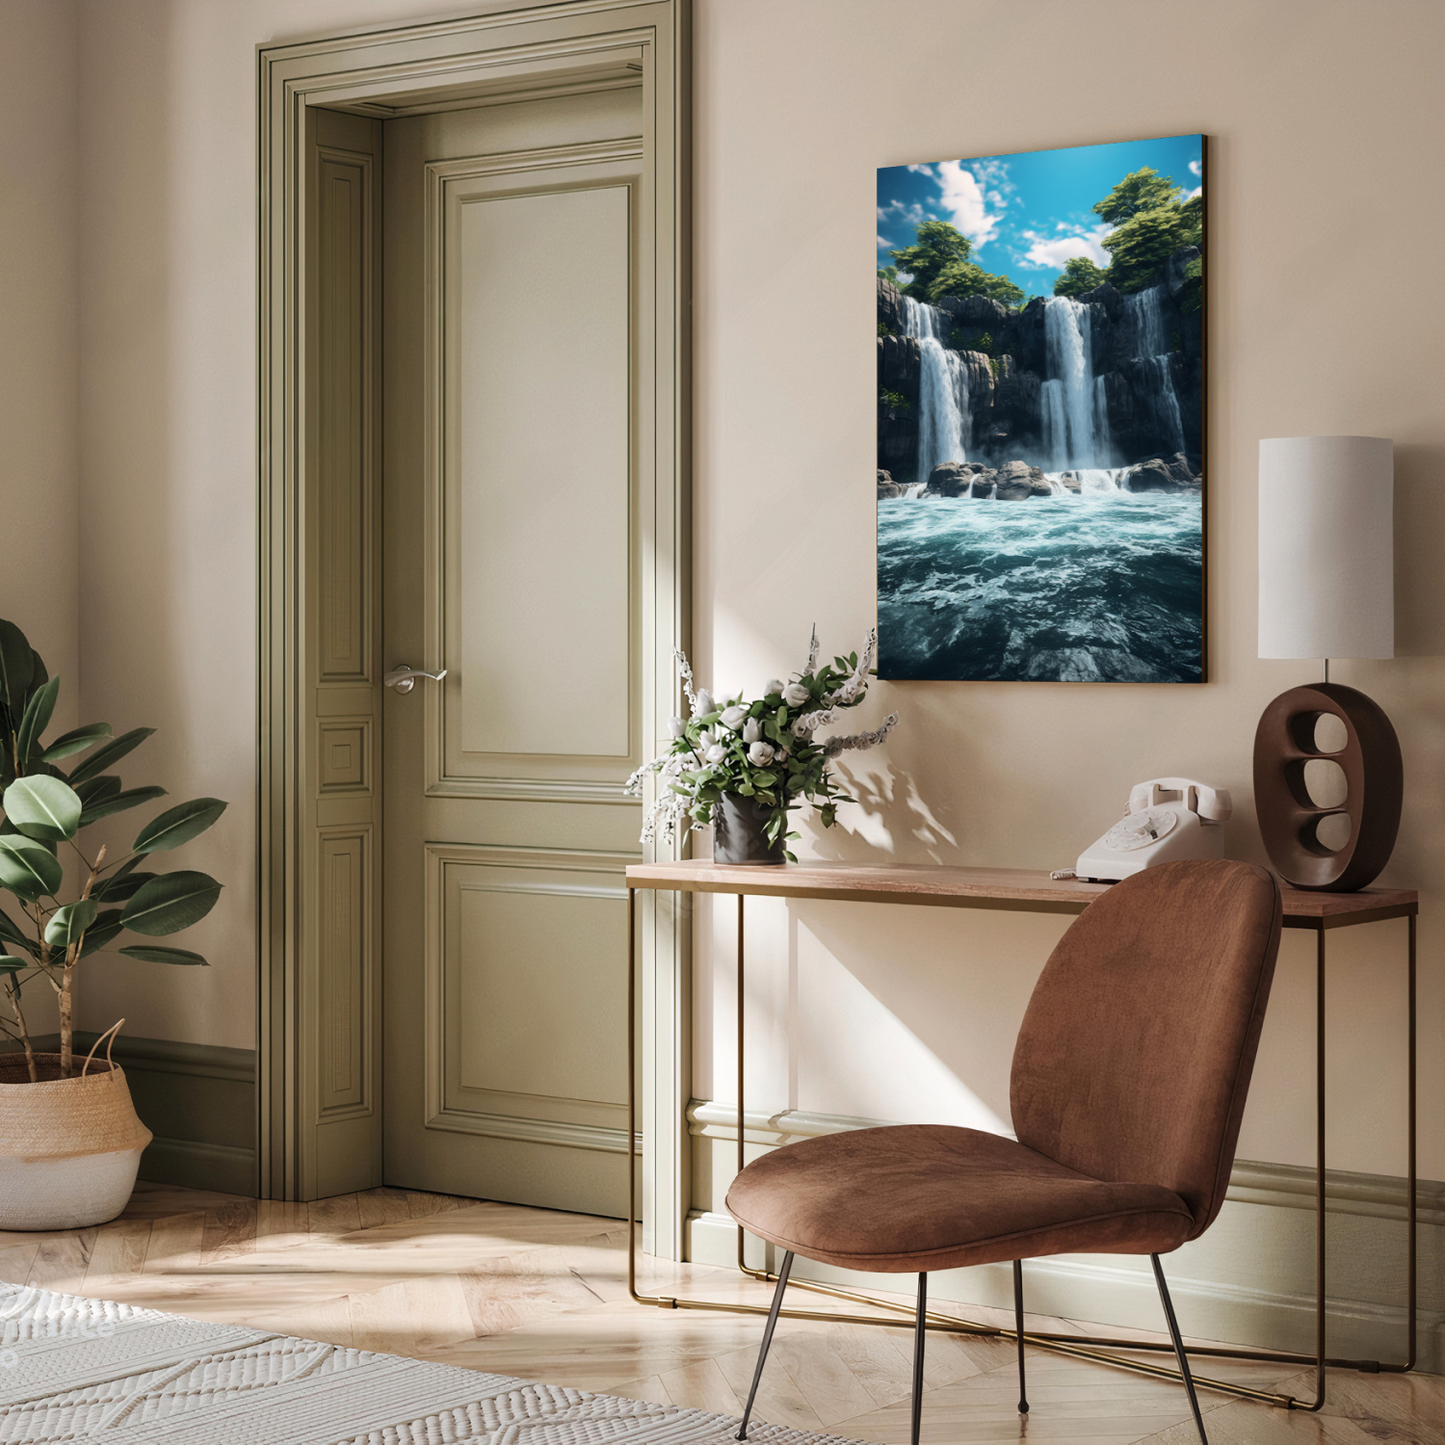 Waterfall With Nature Landscape Wood Print Wall Art